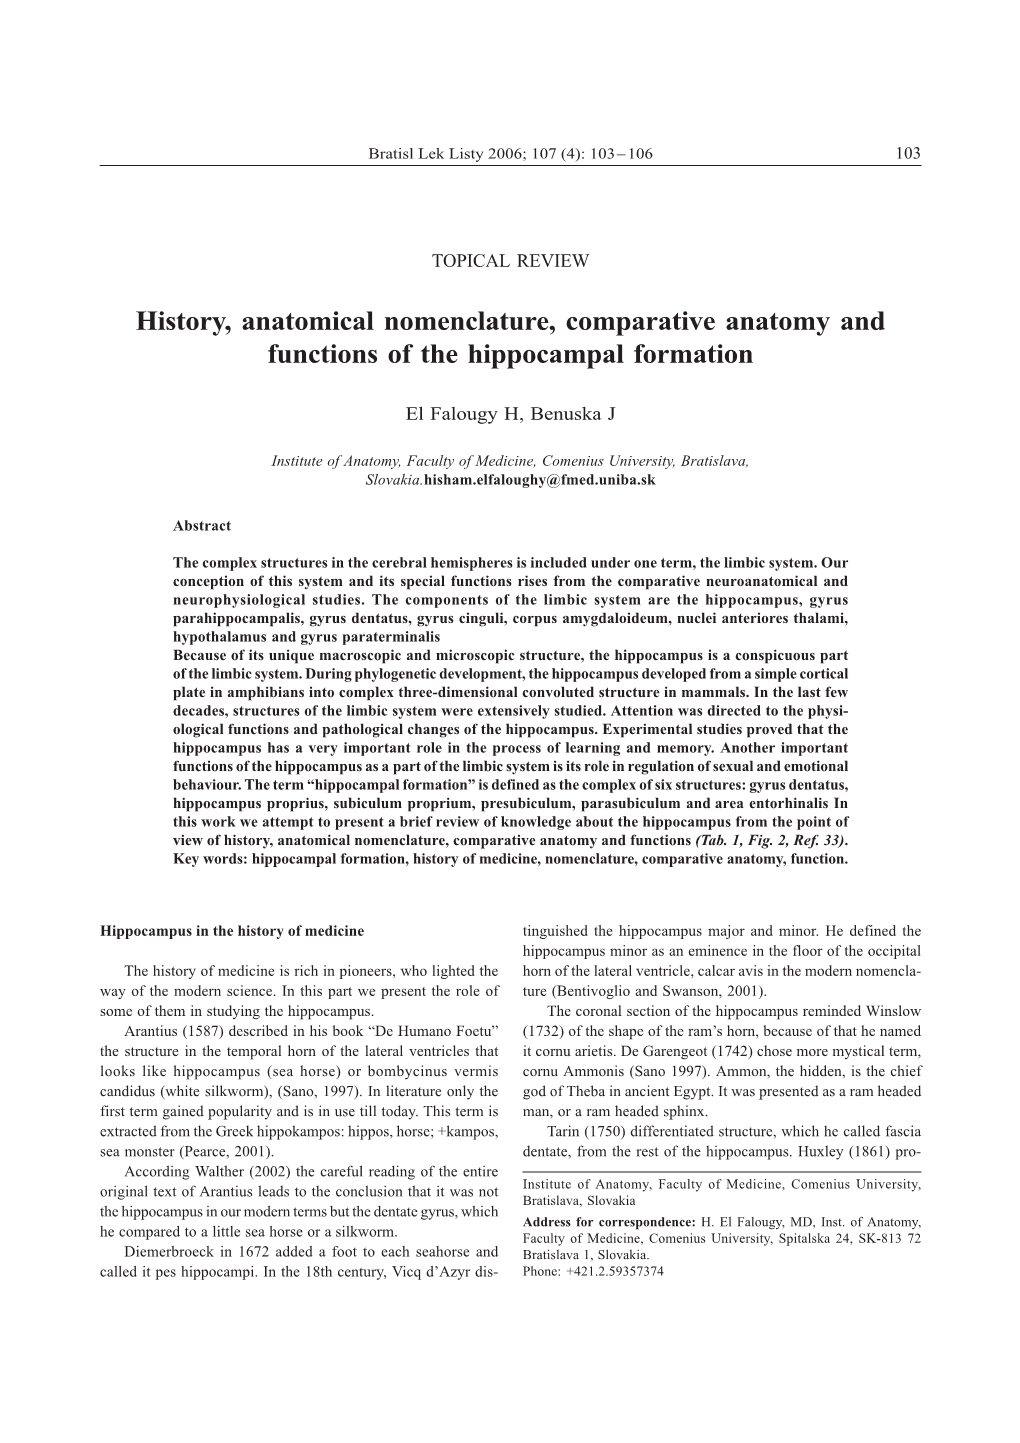 History, Anatomical Nomenclature, Comparative Anatomy and Functions of the Hippocampal Formation